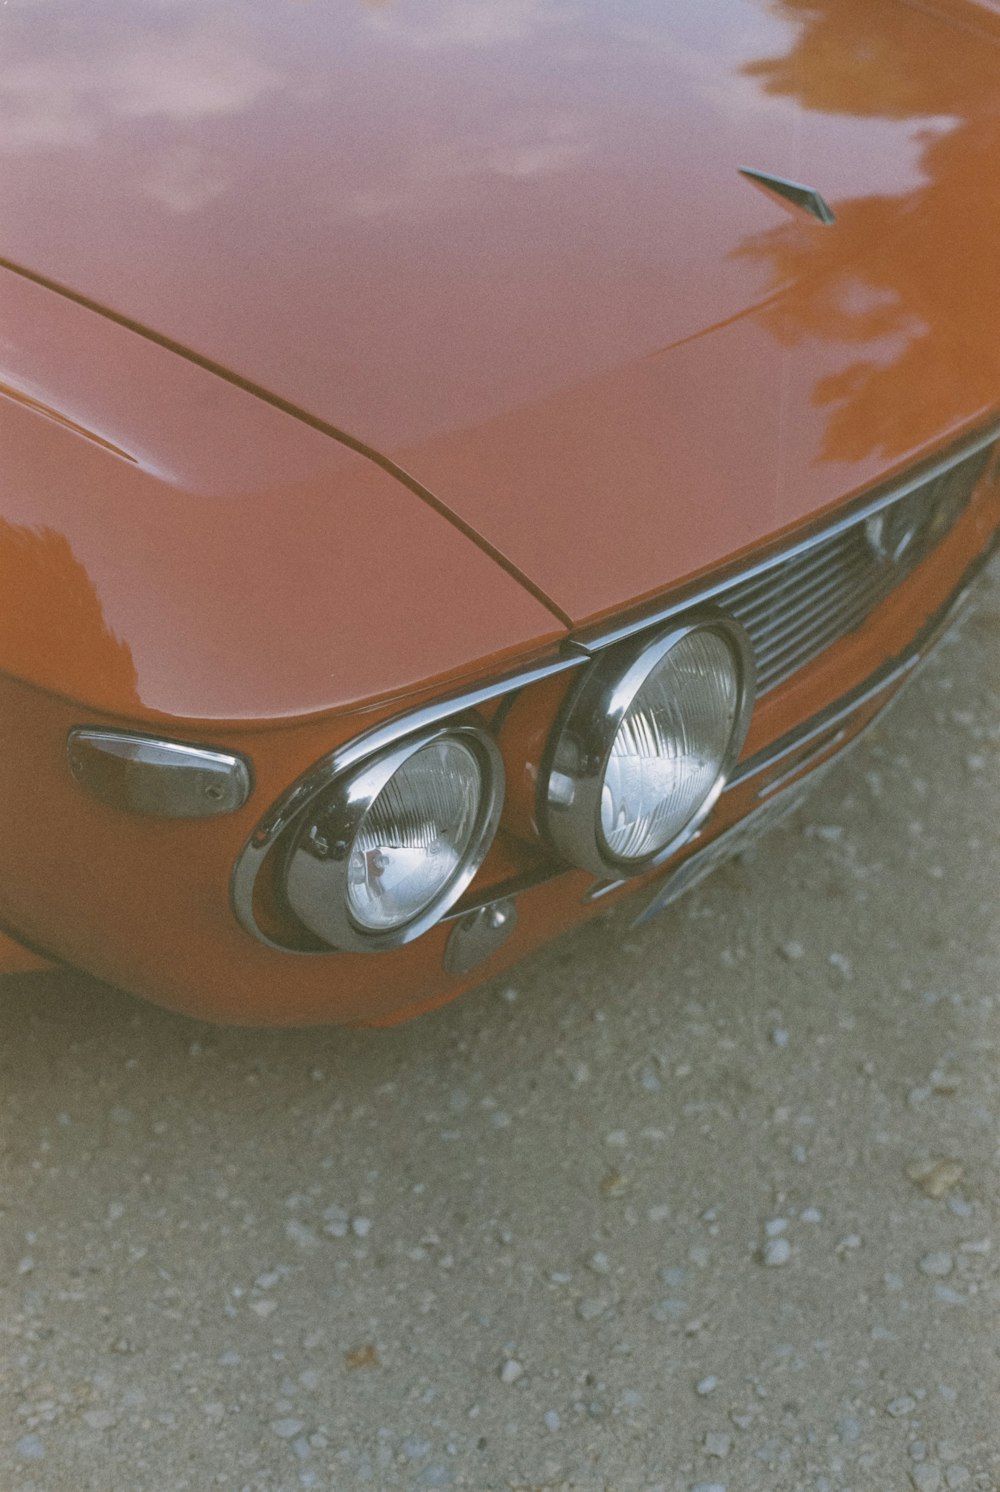 a close up of the front of an orange car